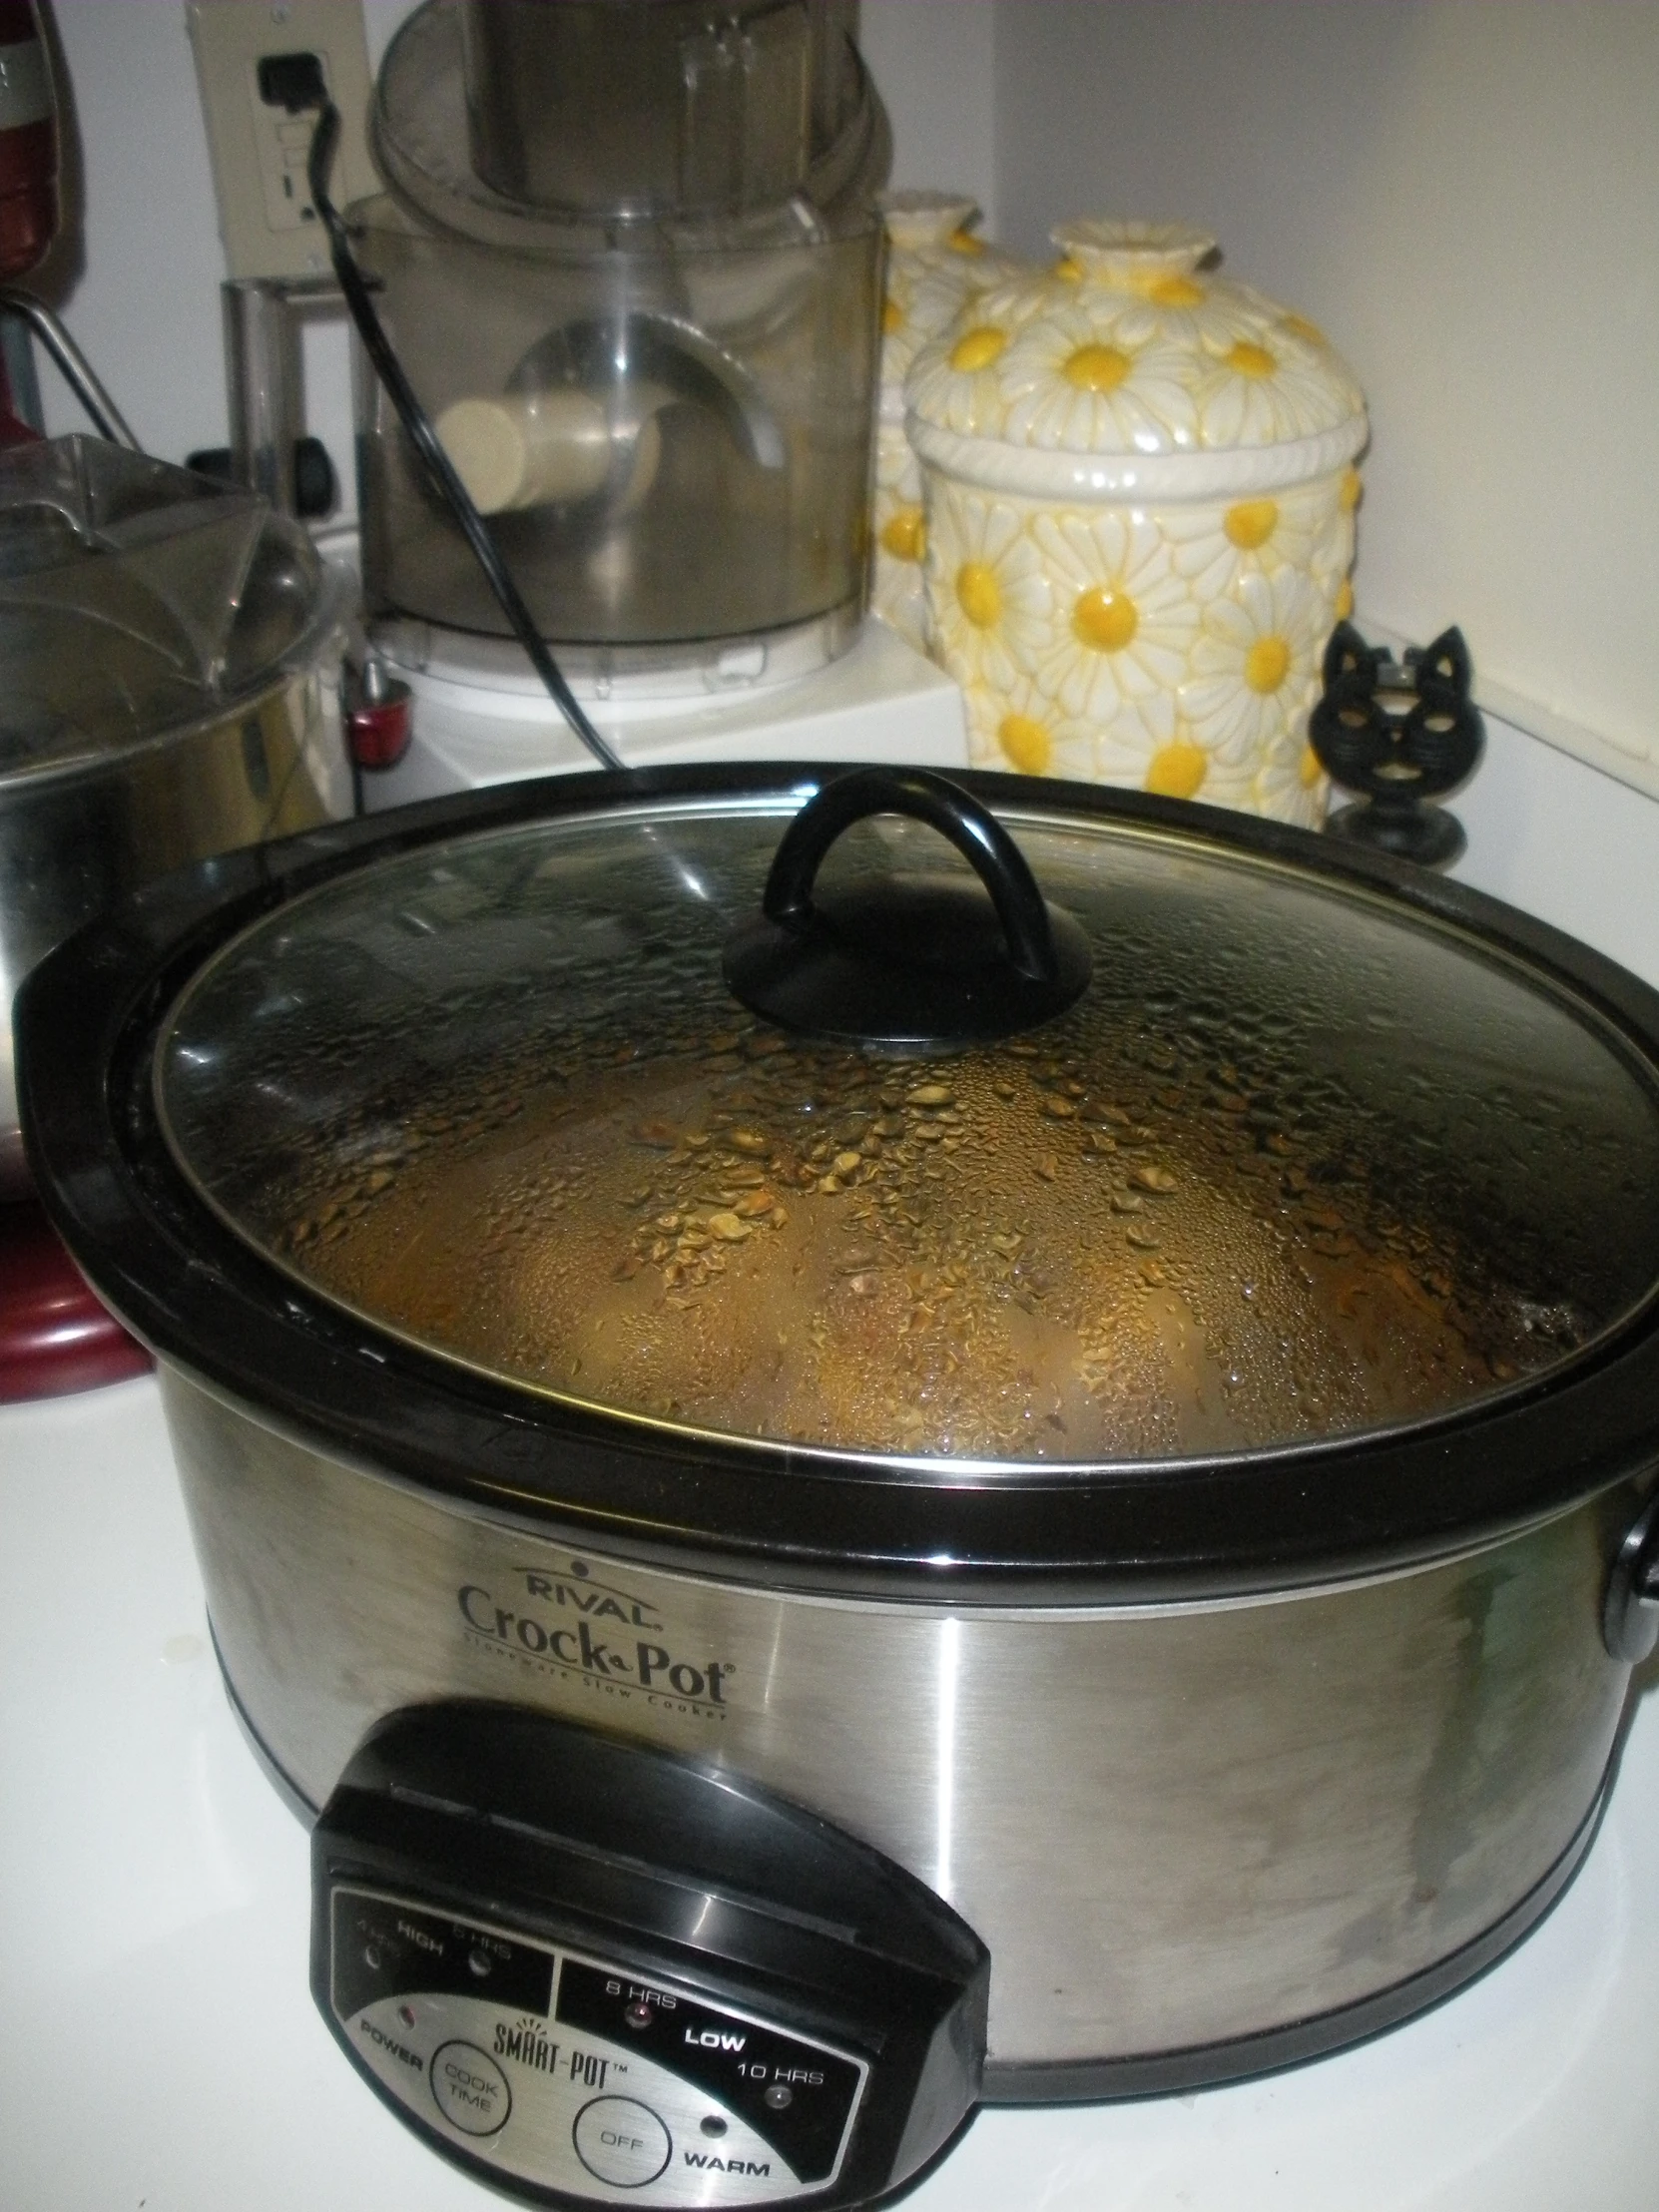 the crock pot has been seasoned and is ready for customers to see